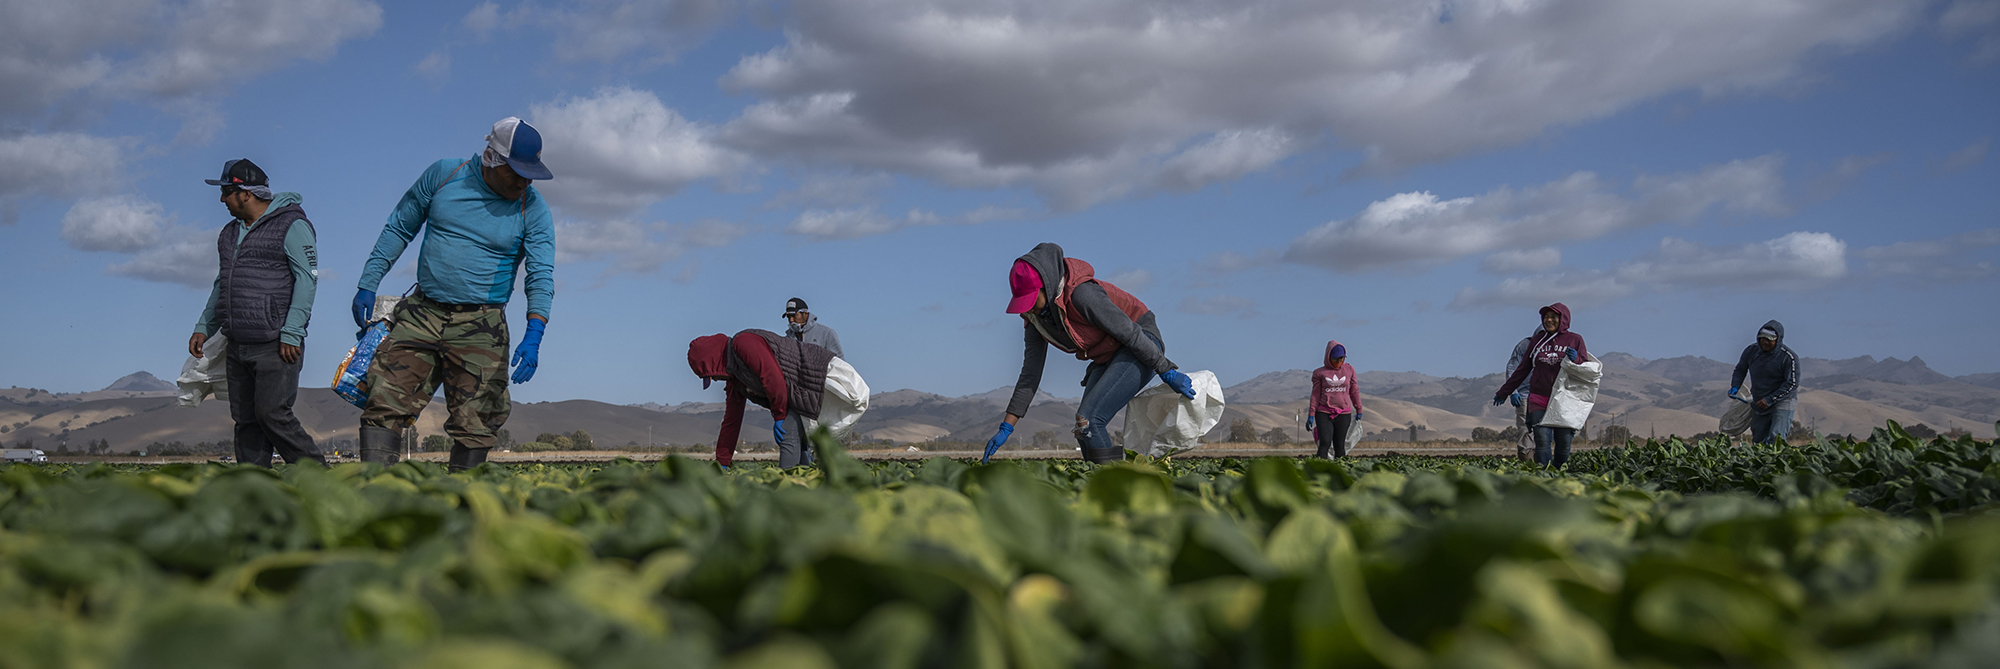 Farmworkers harvest spinach in California